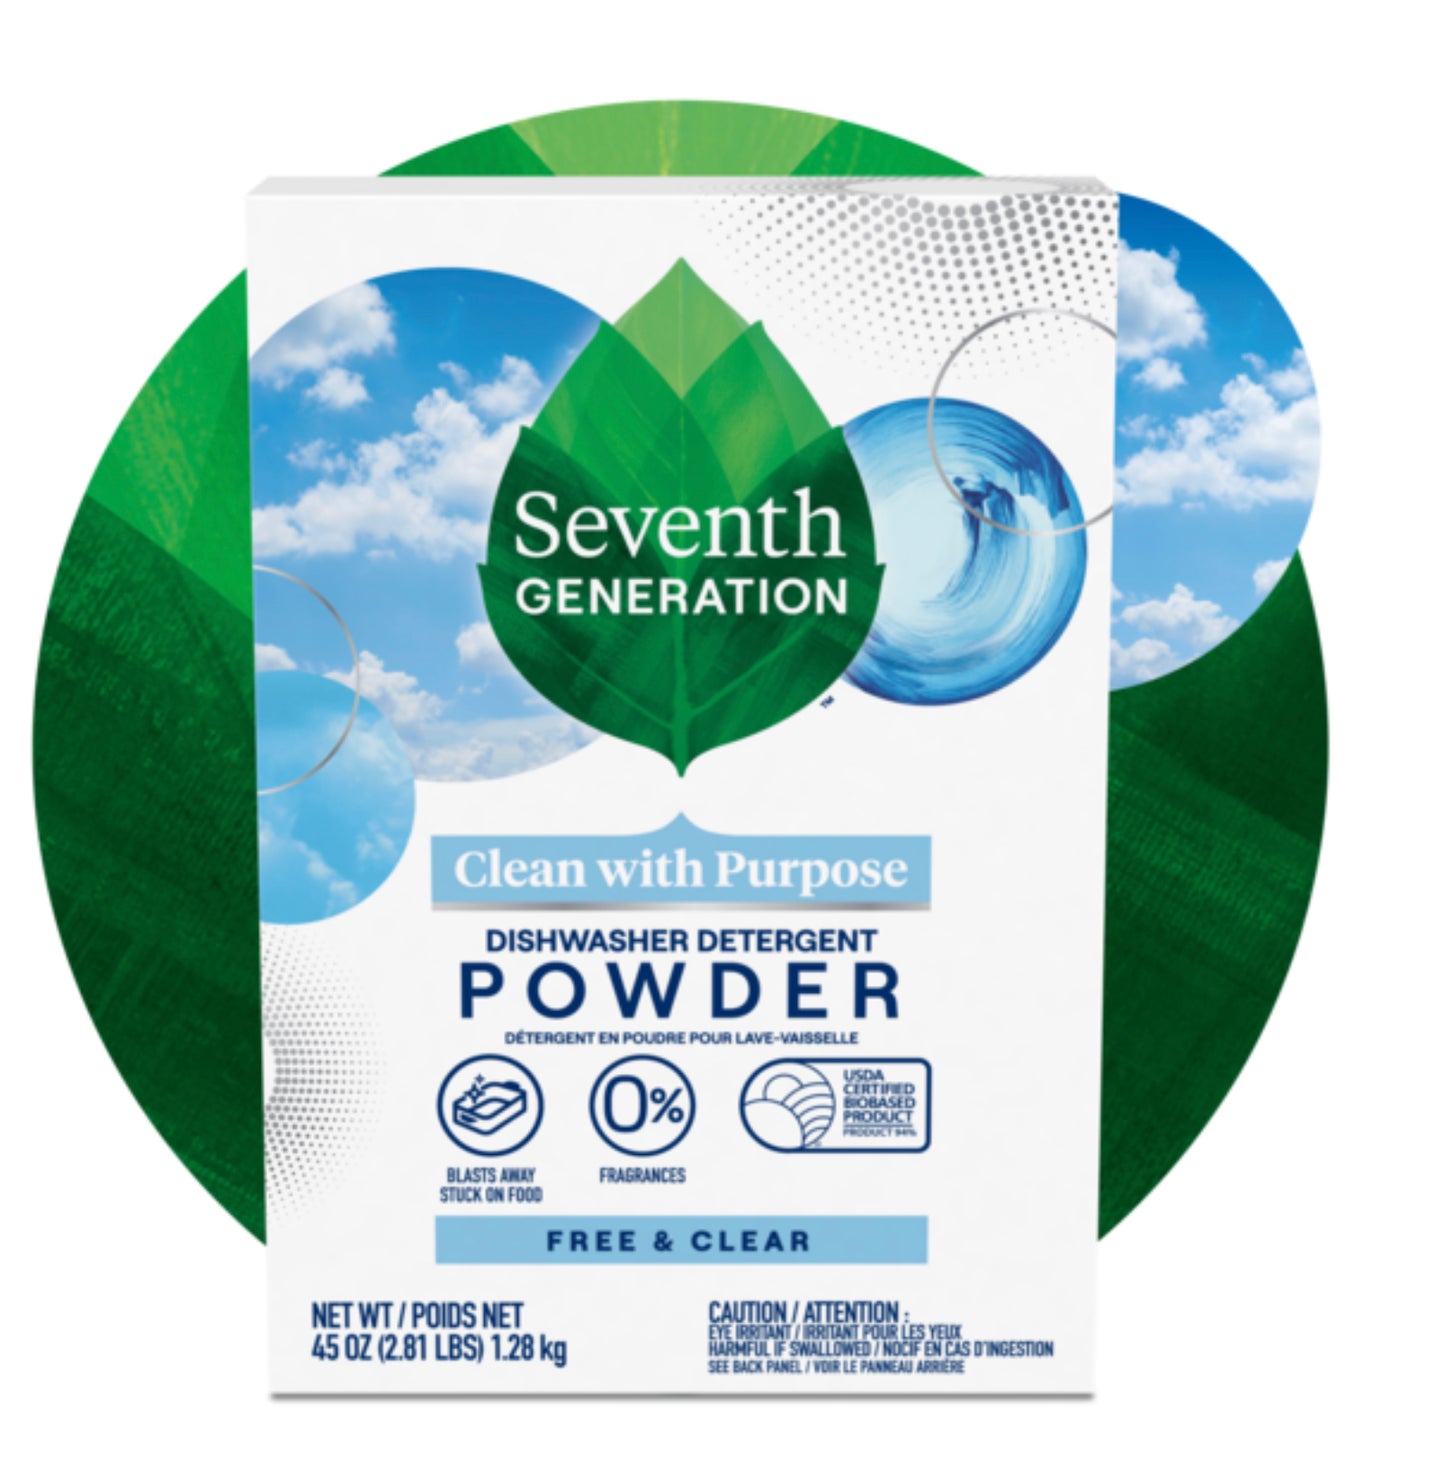 Seventh Generation Power Dishwasher Detergent Free and Clear 45oz